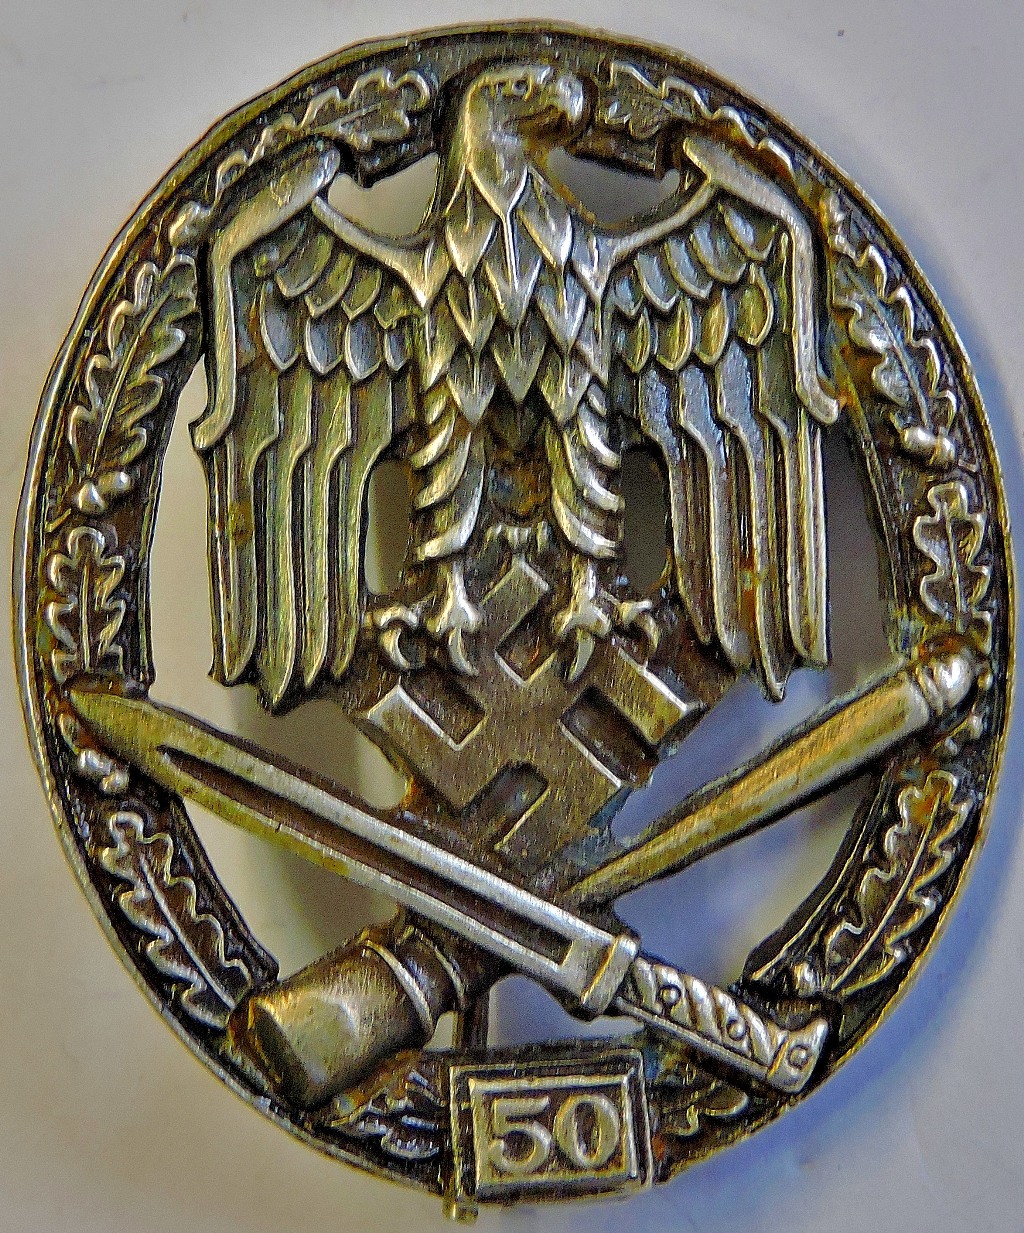 German WWII General Assault Badge for '50' engagements (Sold as is)